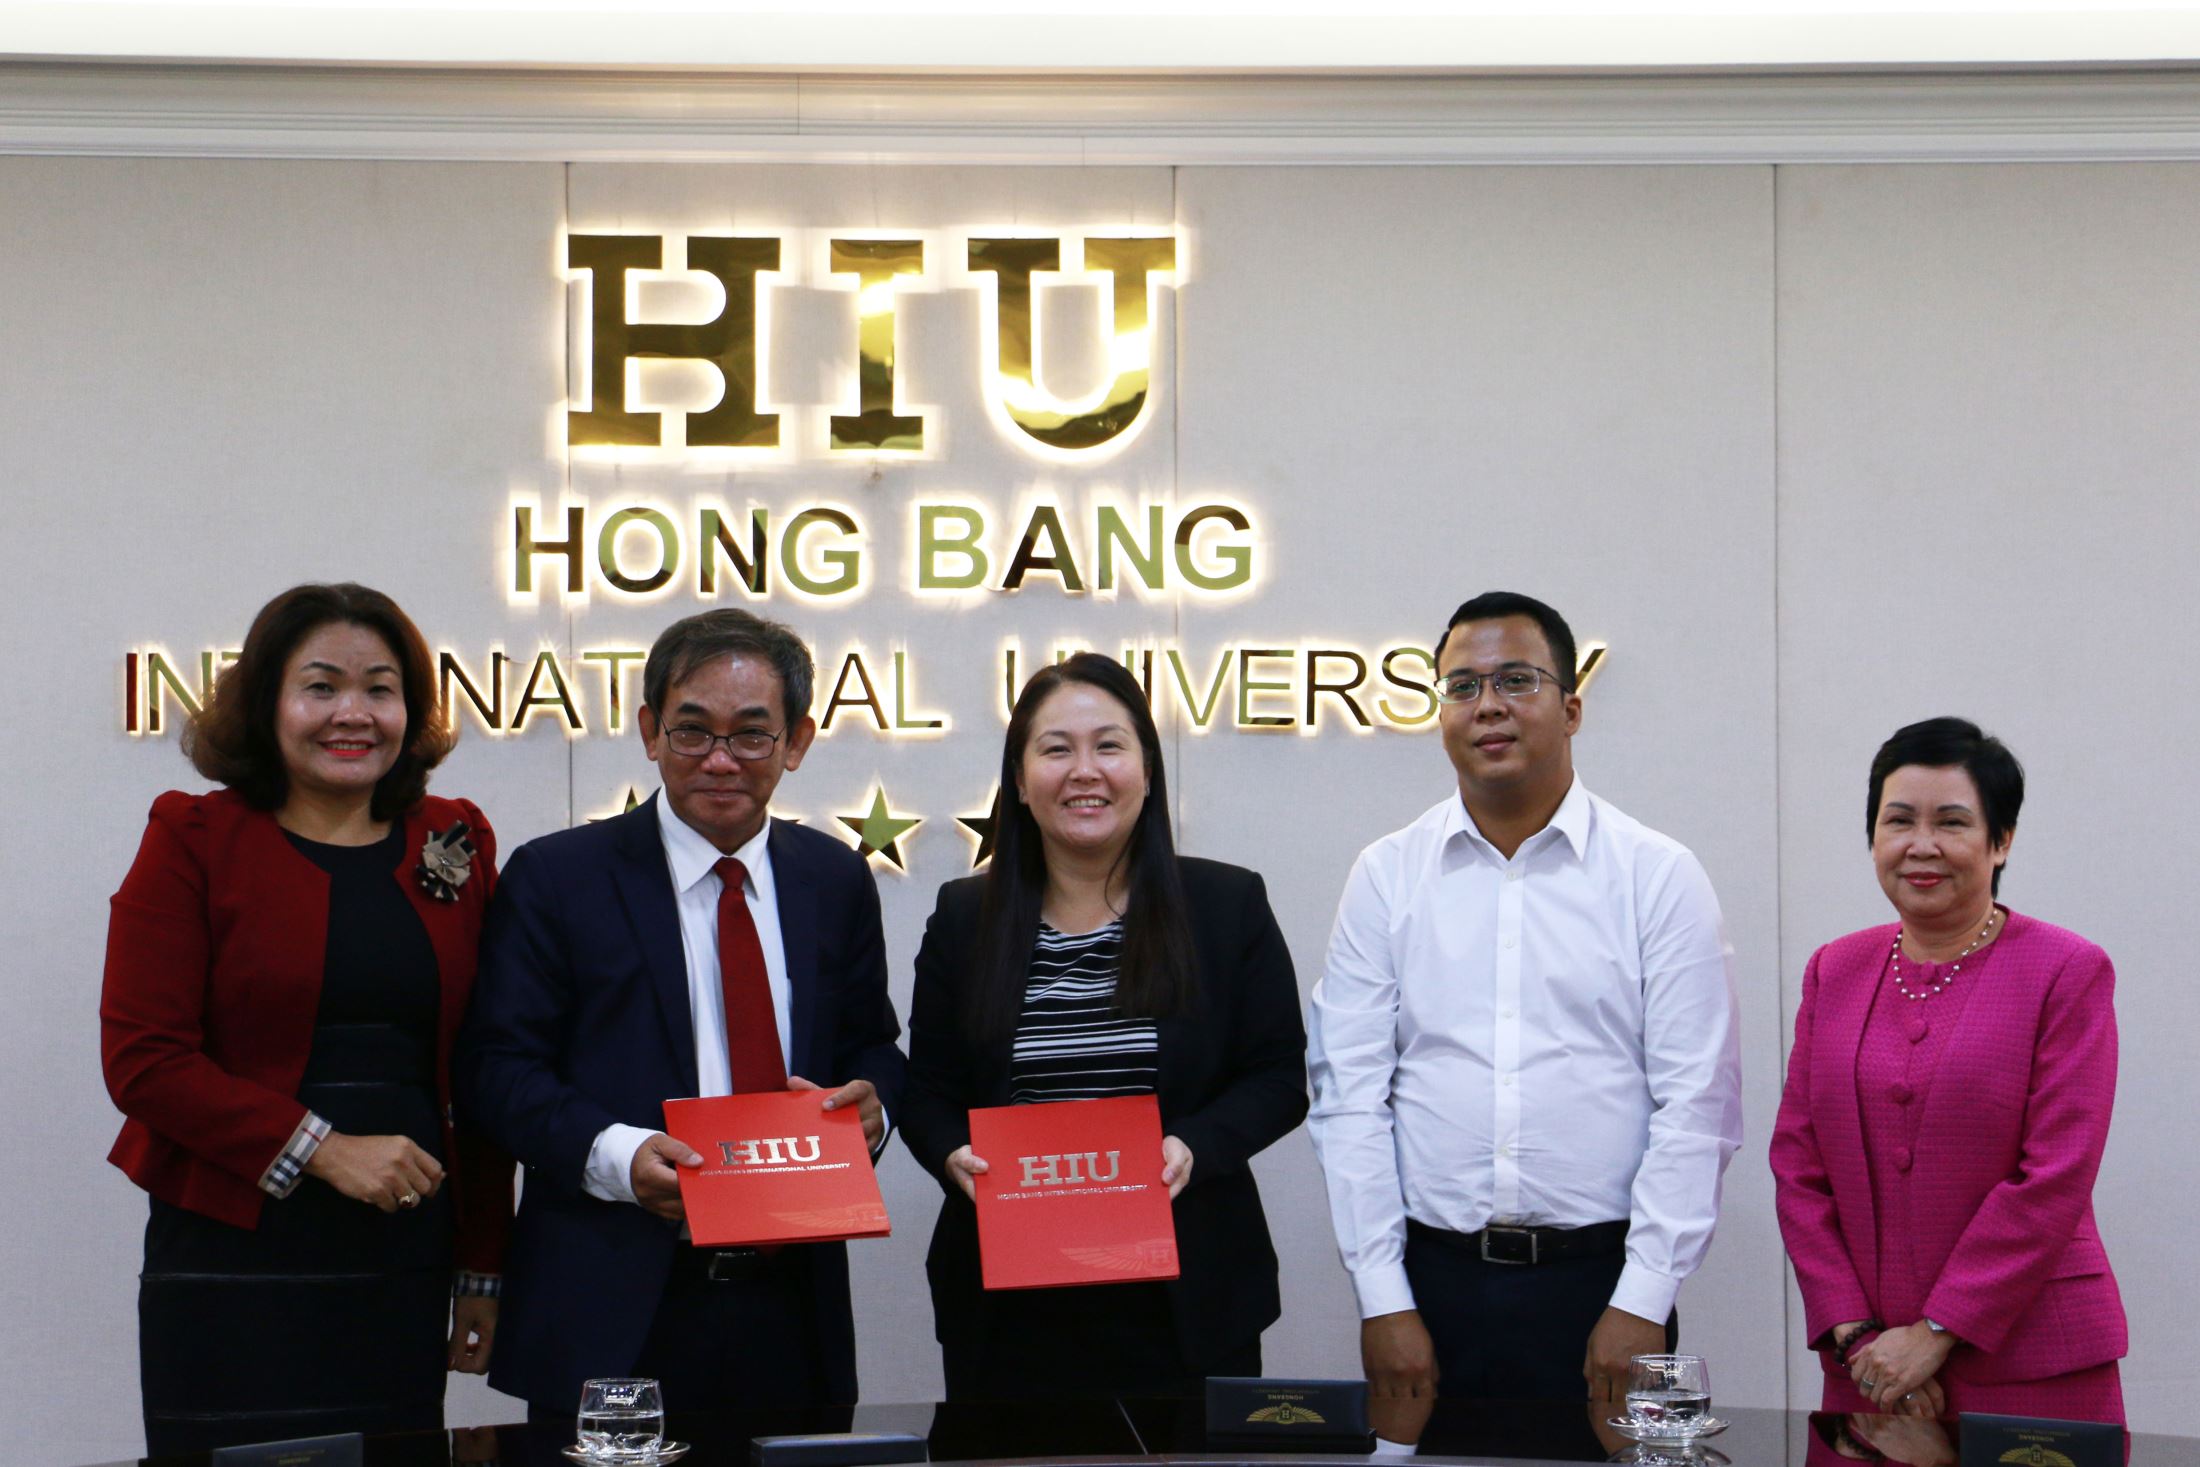 From left to right: Dr. Nguyen Thi Hien Thanh – Head of Admissions of HIU, Associate Professor Dr. Ho Thanh Phong – President of HIU, Ms. Stefanie Leong – Head of Development & Recognition (Asia-pacific) and Mr. Faizol Musa – Regional Development Manager (SEA, Pakistan, Bangladesh) took photos together